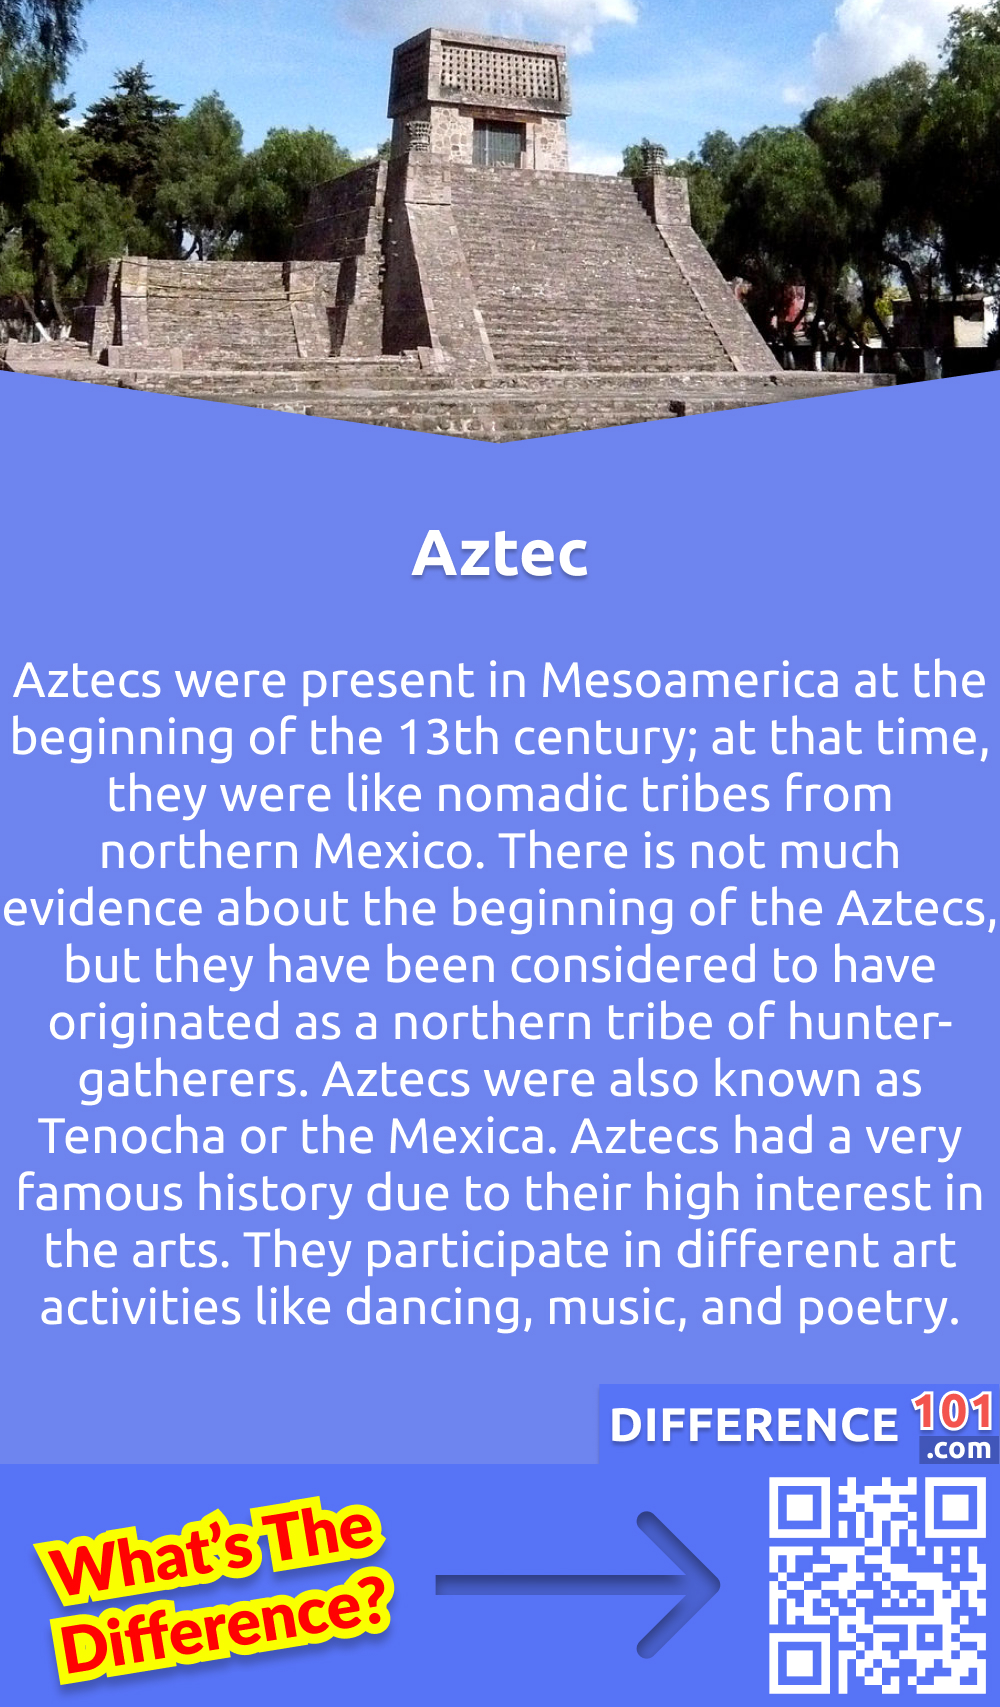 What Are Aztecs? Aztecs were present in Mesoamerica at the beginning of the 13th century; at that time, they were like nomadic tribes from northern Mexico. There is not much evidence about the beginning of the Aztecs, but they have been considered to have originated as a northern tribe of hunter-gatherers. Aztecs were also known as Tenocha or the Mexica. Aztecs had a very famous history due to their high interest in the arts. They participate in different art activities like dancing, music, and poetry.